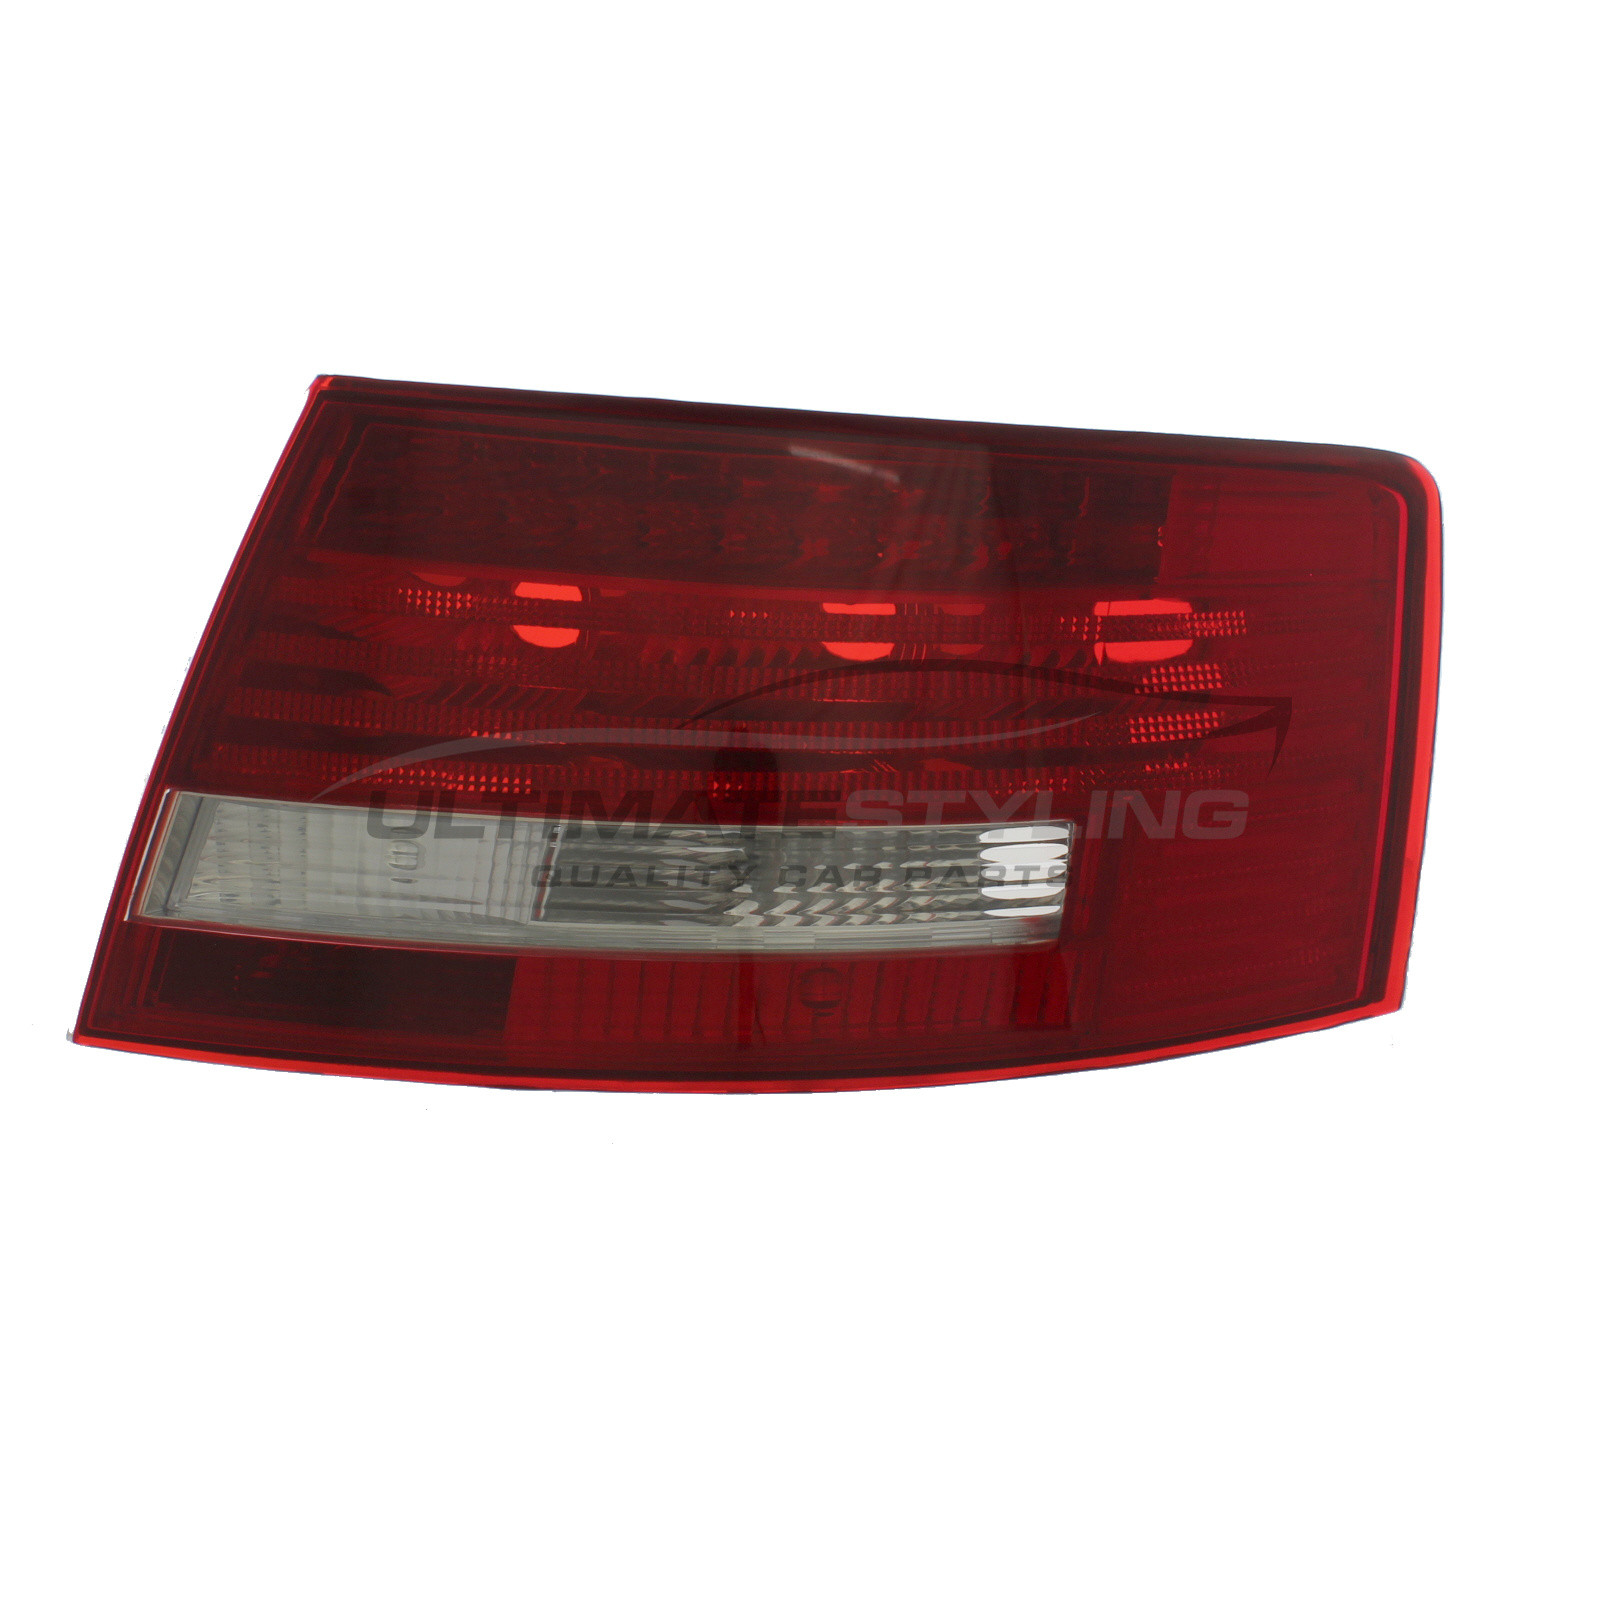 Audi A6 2004-2008 / Audi RS6 2008-2008 / Audi S6 2006-2011 LED with Clear Indicator Rear Light / Tail Light Excluding Bulb Holder Drivers Side (RH)